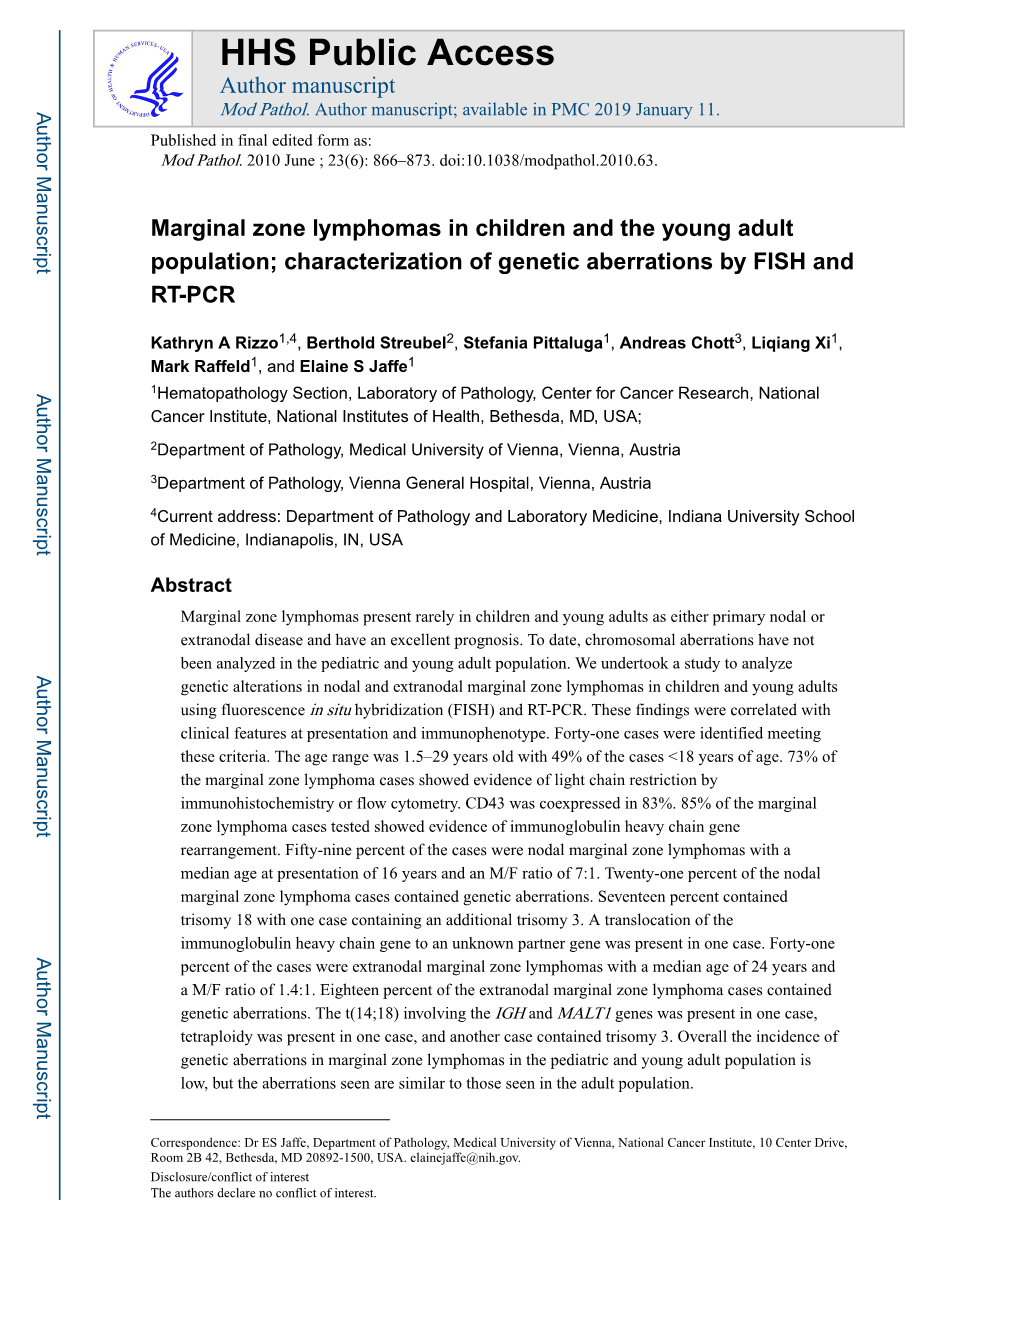 Marginal Zone Lymphomas in Children and the Young Adult Population; Characterization of Genetic Aberrations by FISH and RT-PCR